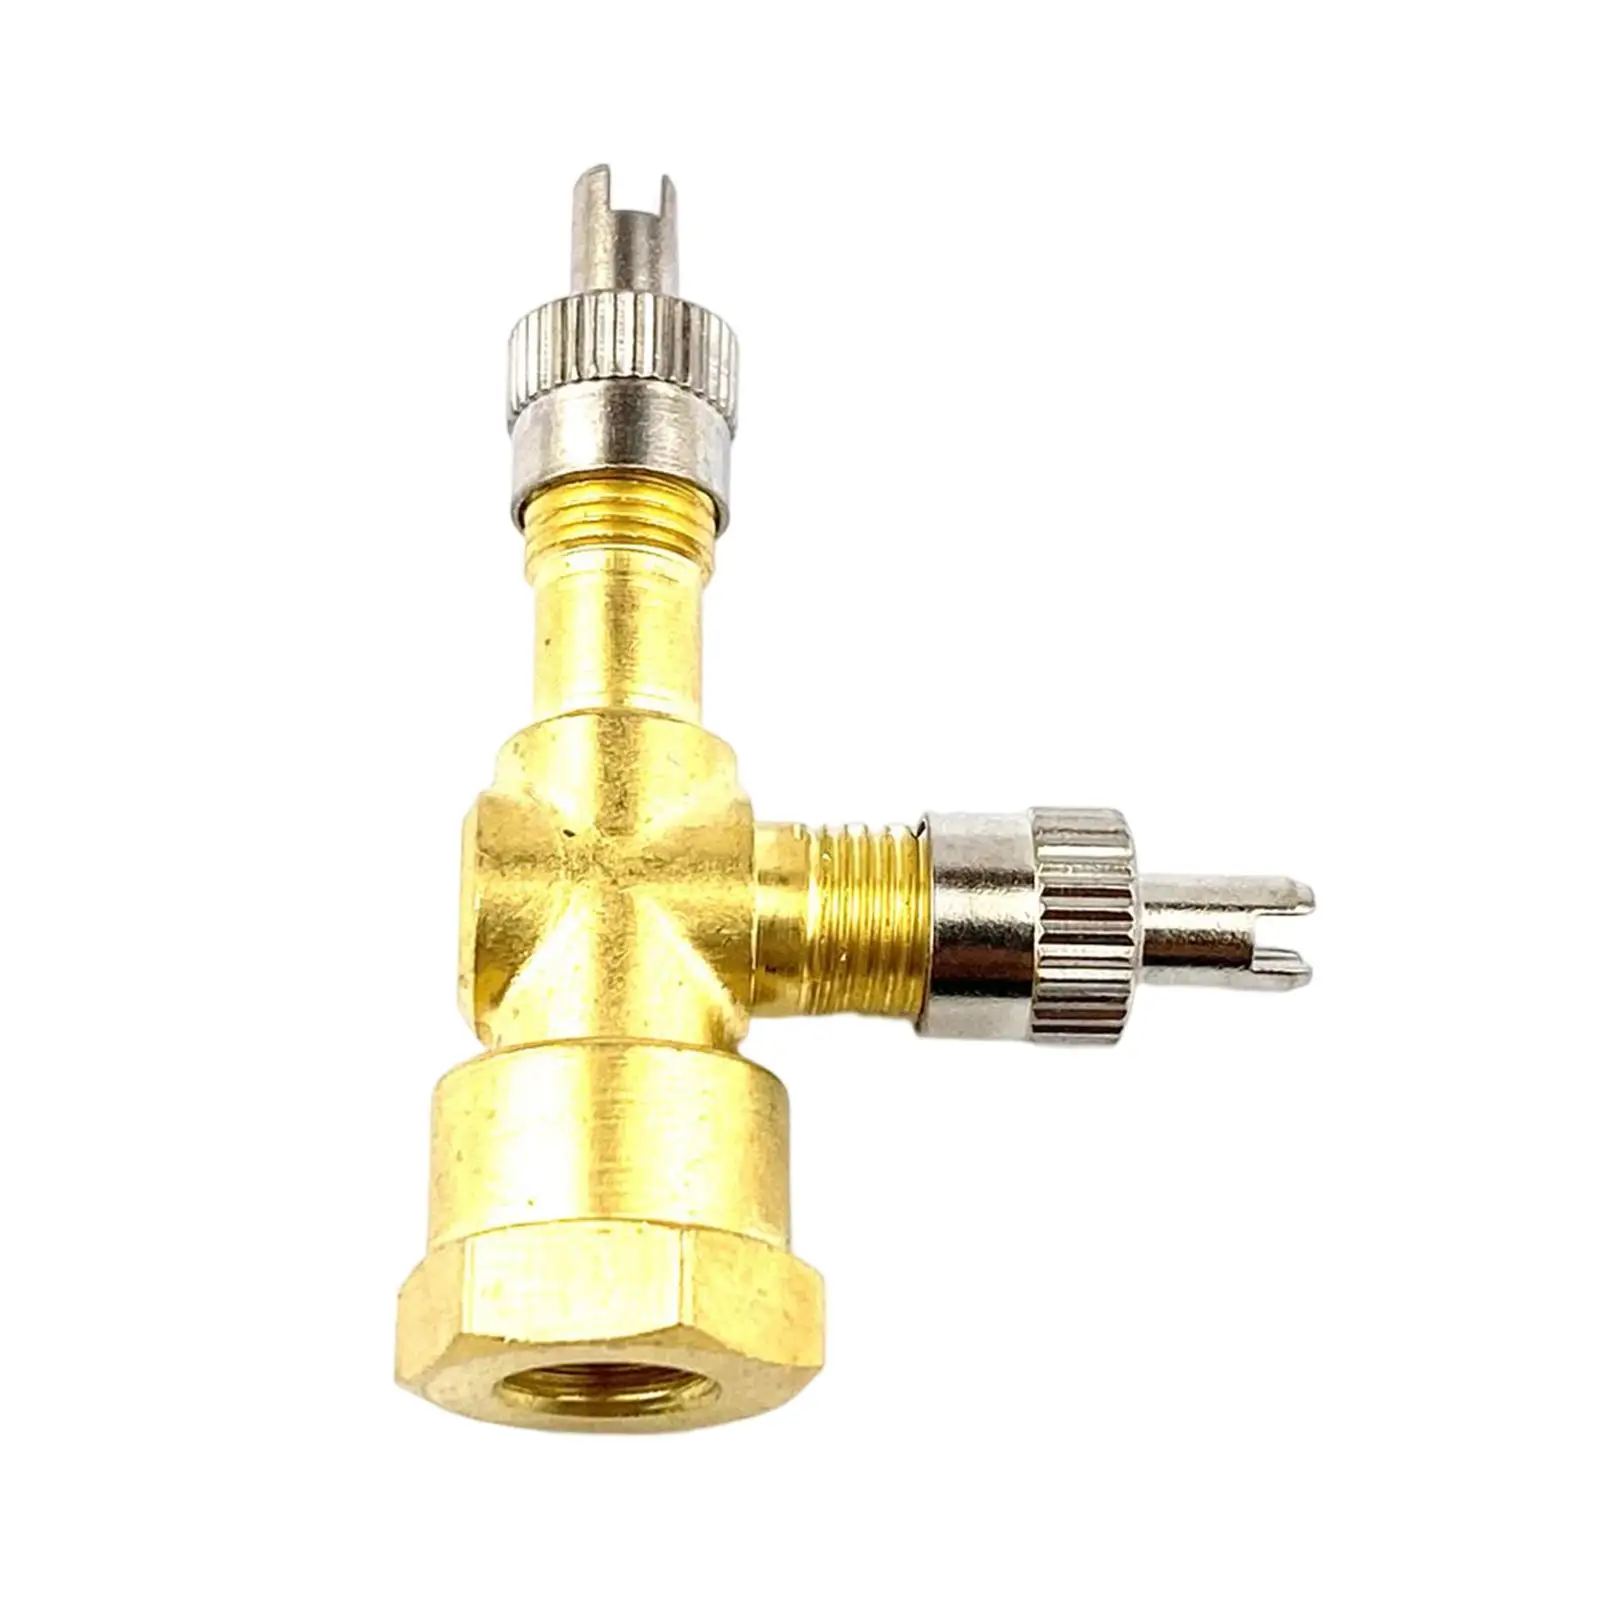 Tire valves Nozzle Leak proofs Air Protection Lightweight for Motorcycles